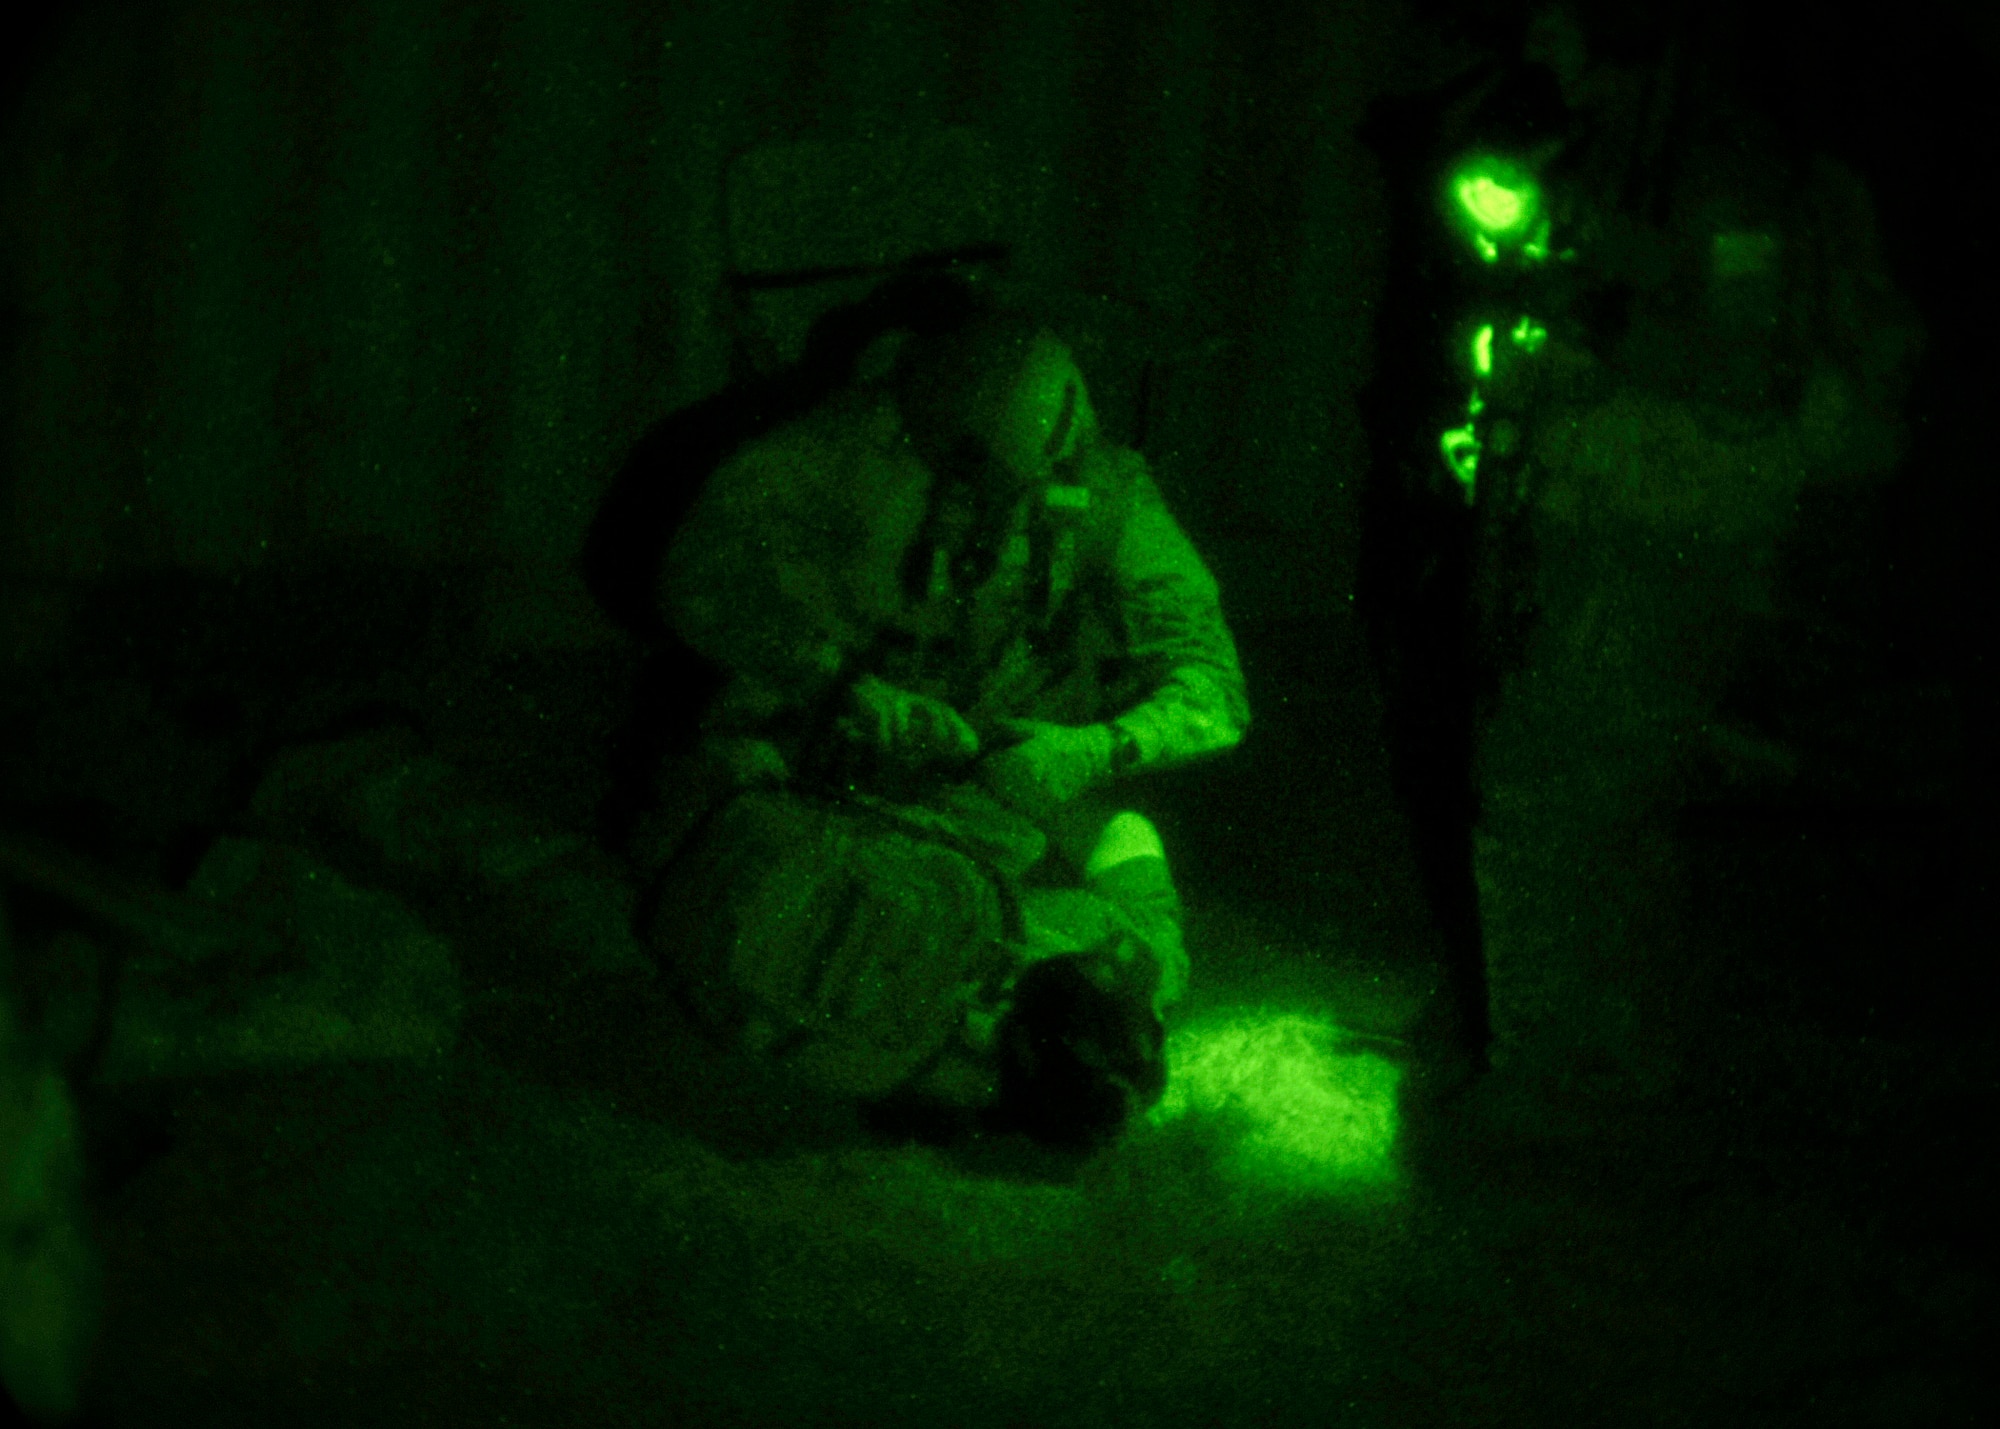 U.S soldiers with the 3rd Special Forces Group, detain a ?terrorist? during an exercise at Melrose Range, N.M., Sept. 22, 2011. The exercise, entitled Operation Dark Night, was designed to prepare the special operators for situations they could encounter on real world missions. (U.S. Air Force photo by Airman 1st Class Ericka Engblom/ Released)